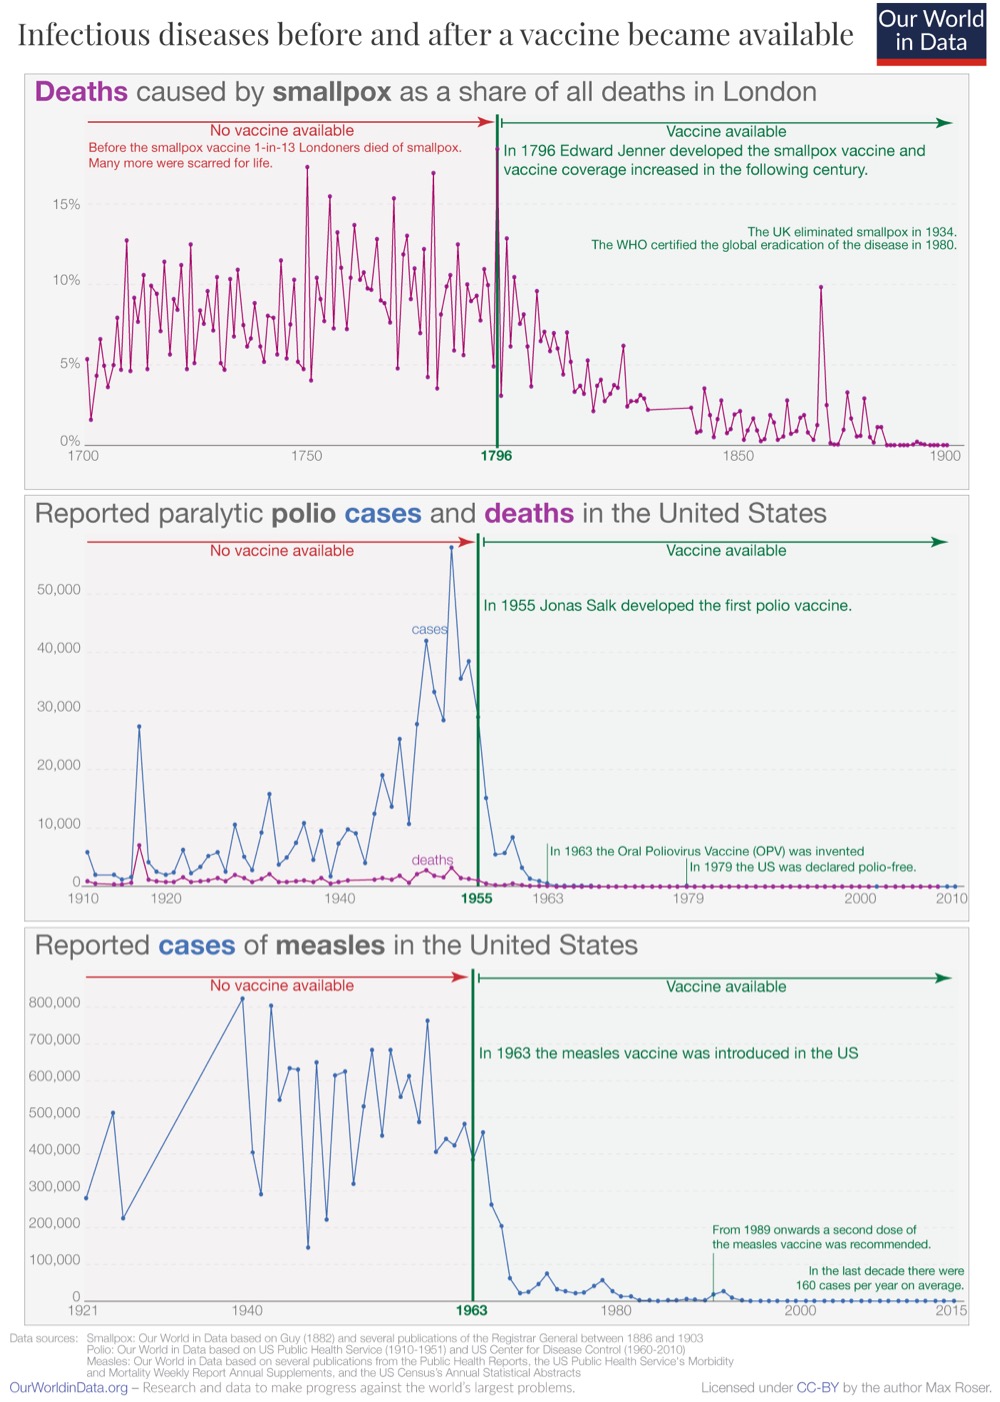 graphs showing marked reduction in cases and deaths for smallpox, polio, and measles